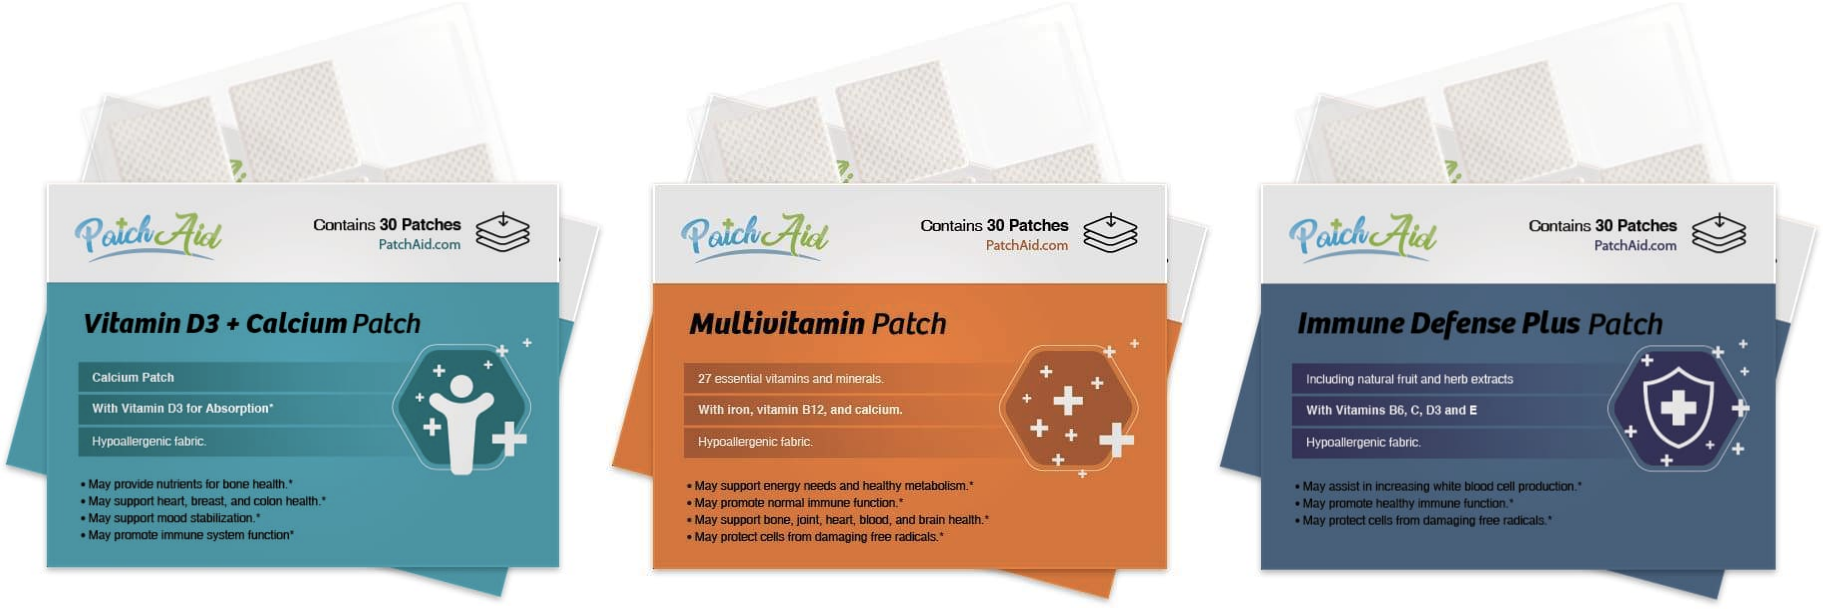 Women’s Health Patch Pack by PatchAid - High-quality Vitamin Patch by PatchAid at 